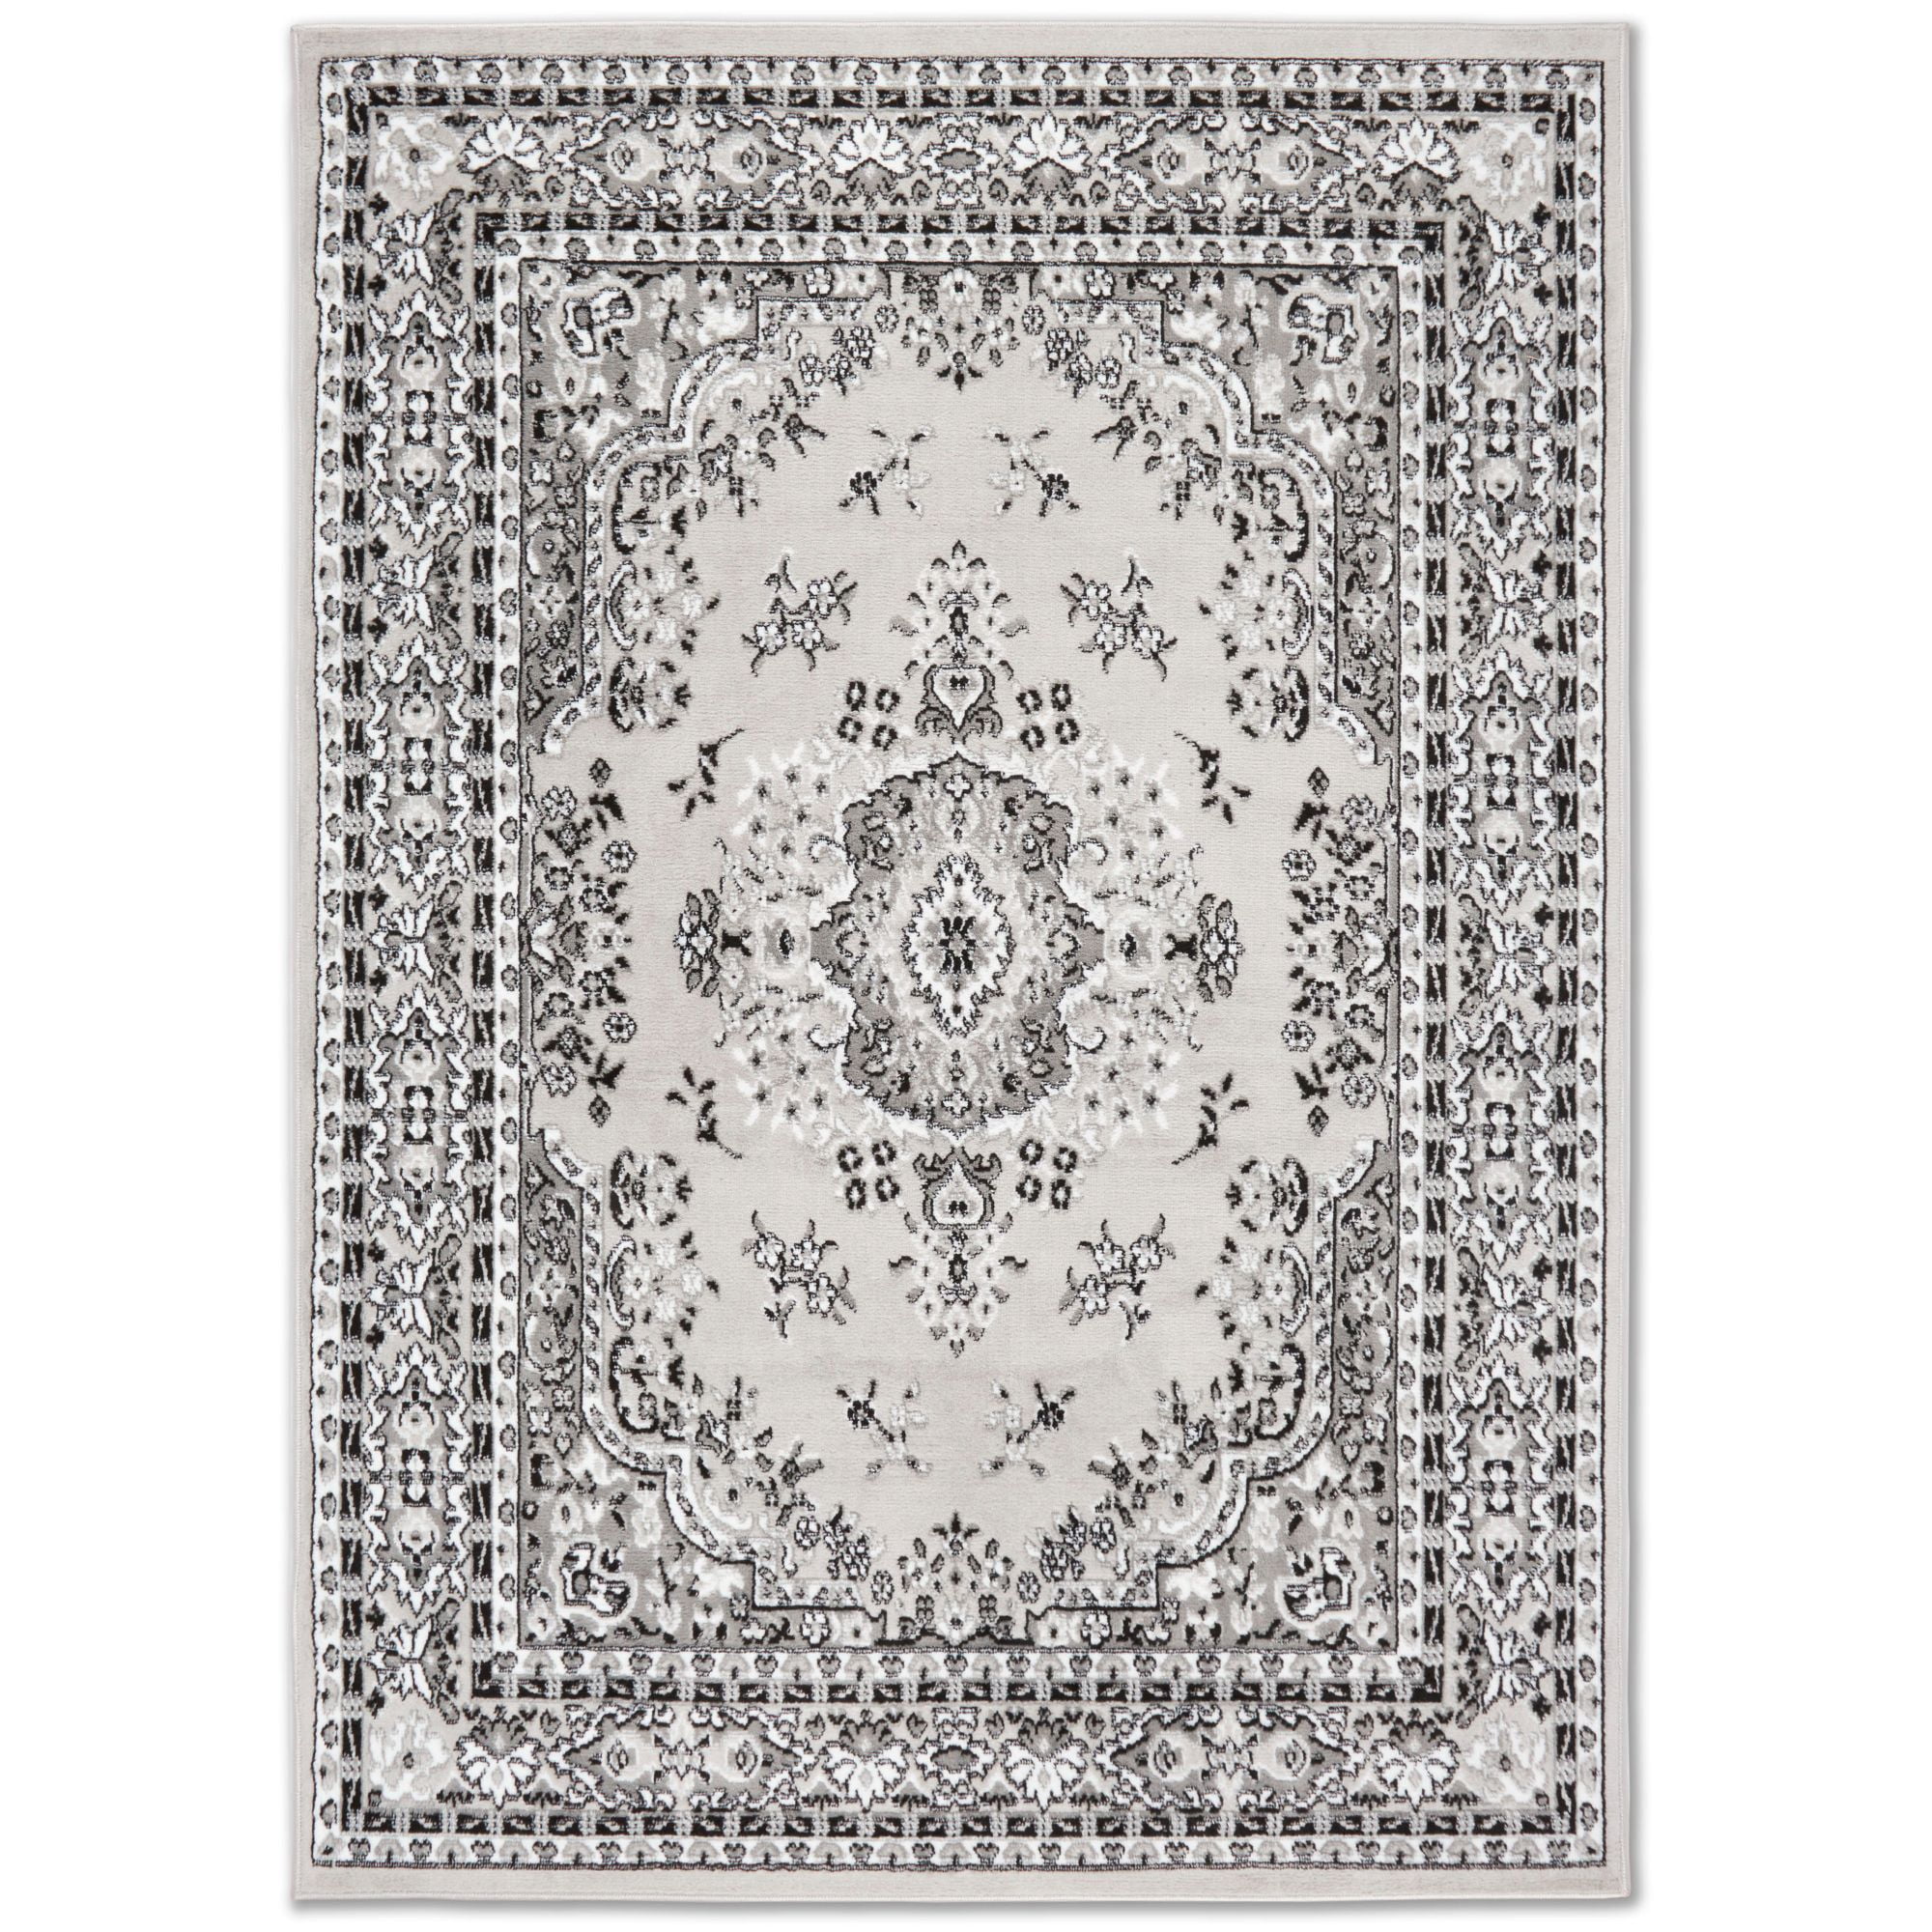 Home Dynamix Tremont Magnolia Persia Area Rug - 6'6x9'6 - Navy/Ivory